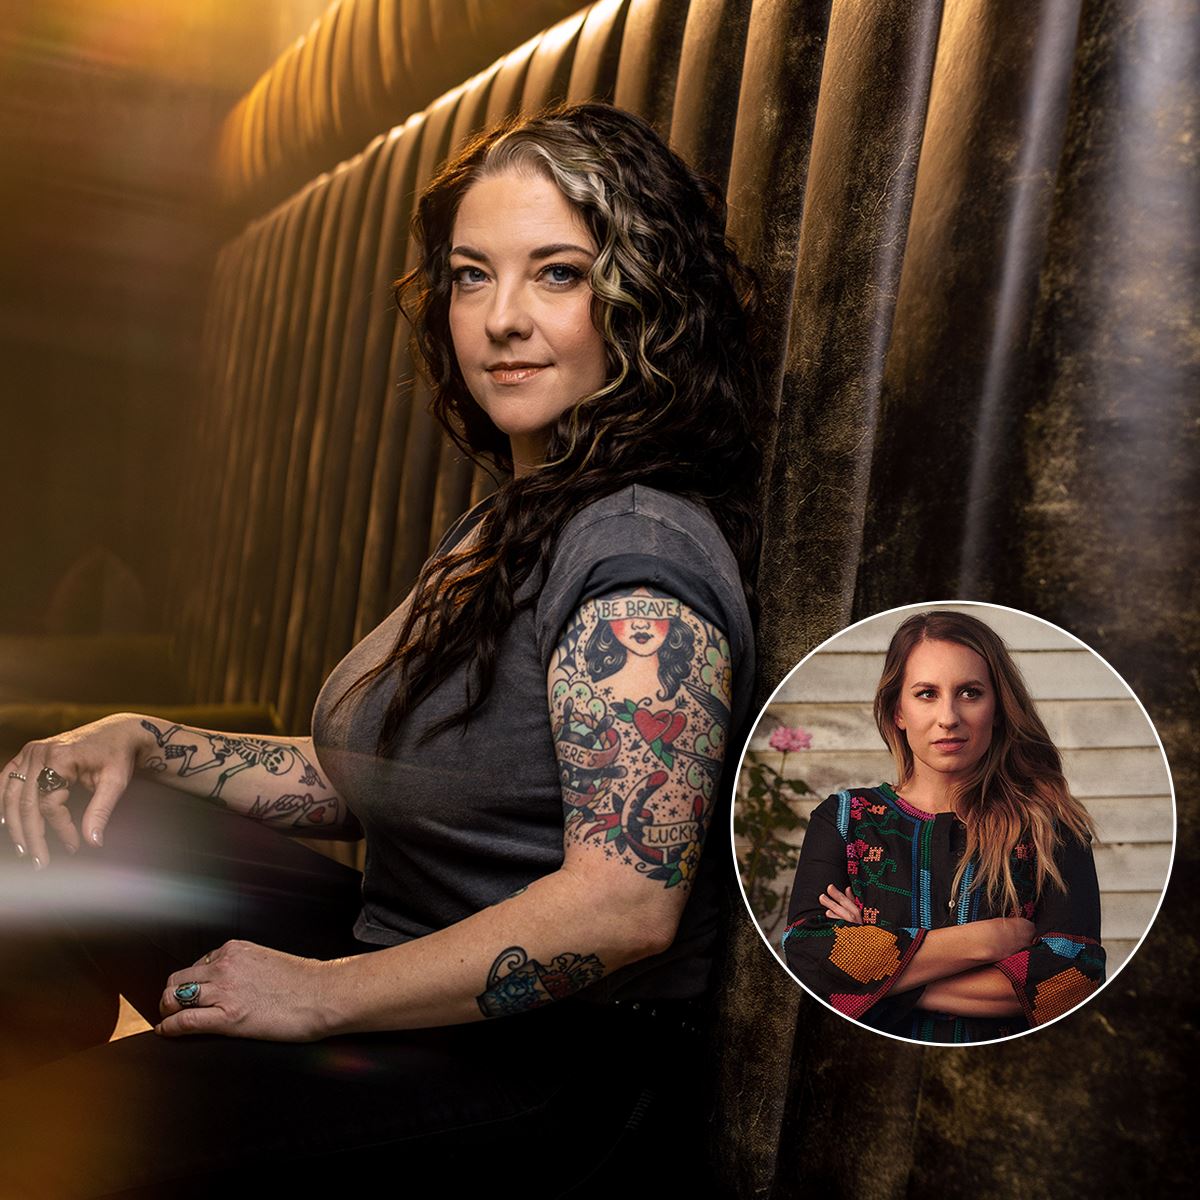 Ashley McBryde with special guest Caitlyn Smith